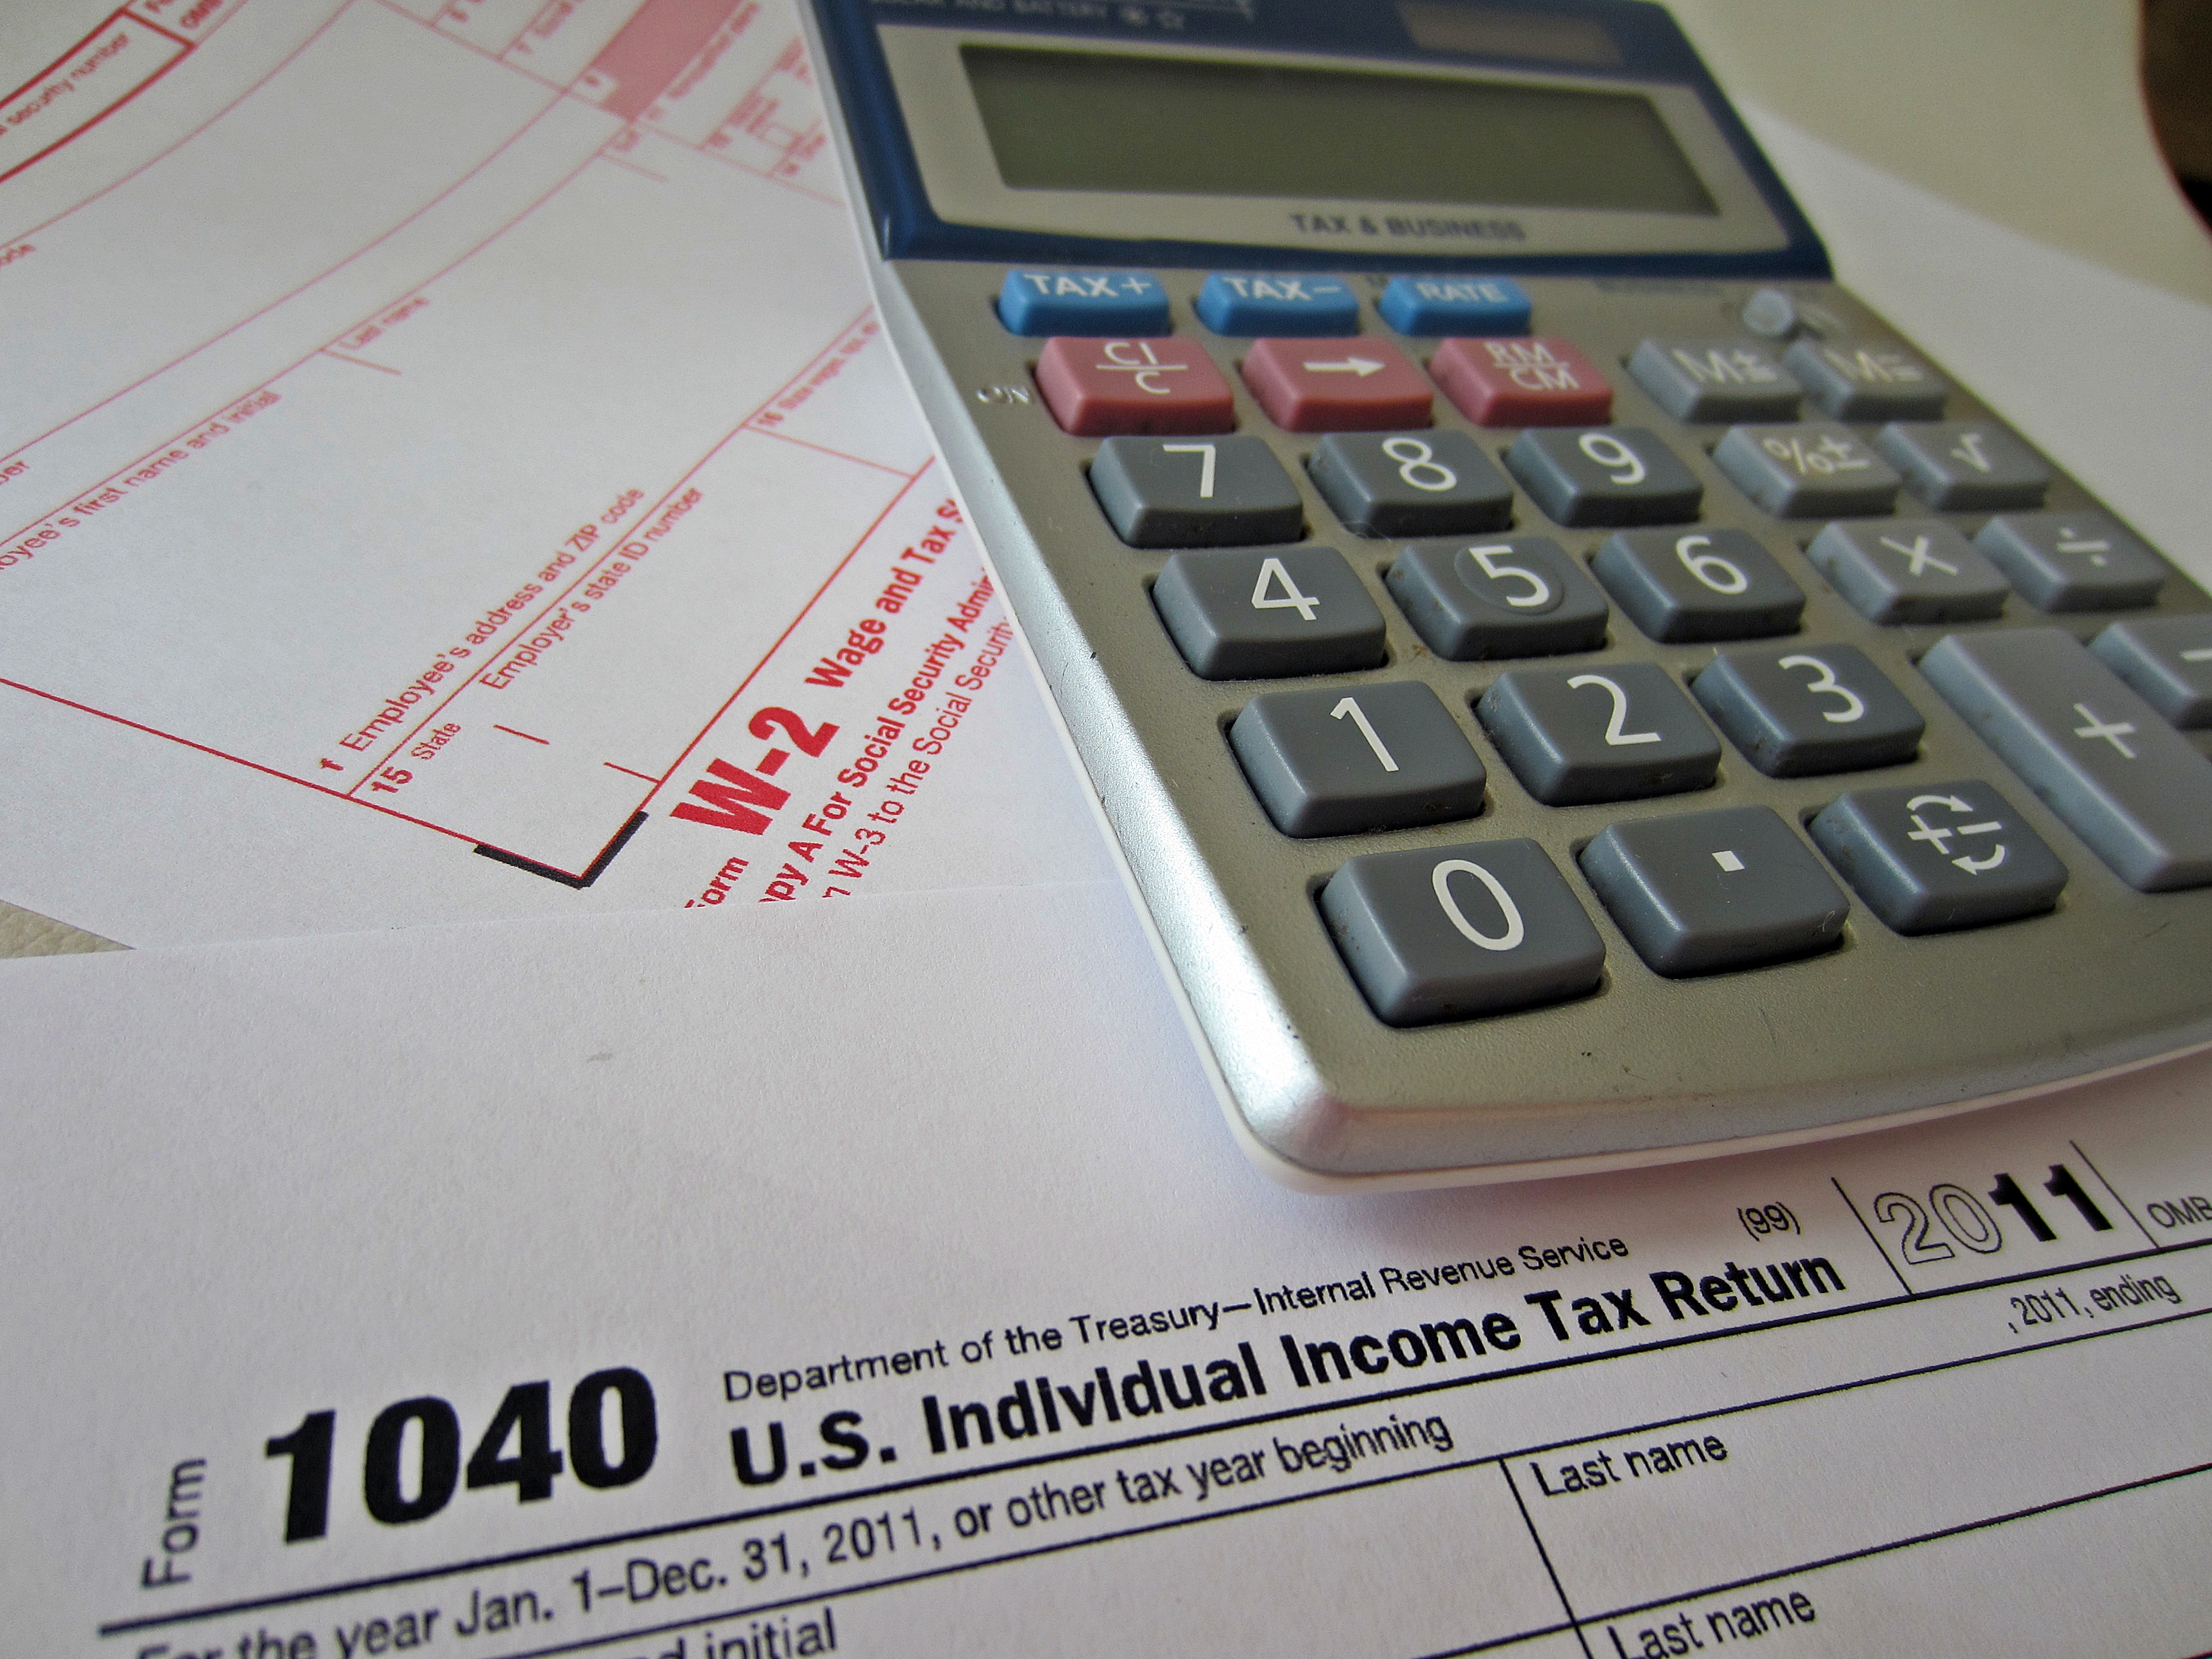 How to Beat the Stress That Comes During IRS Tax Preparation